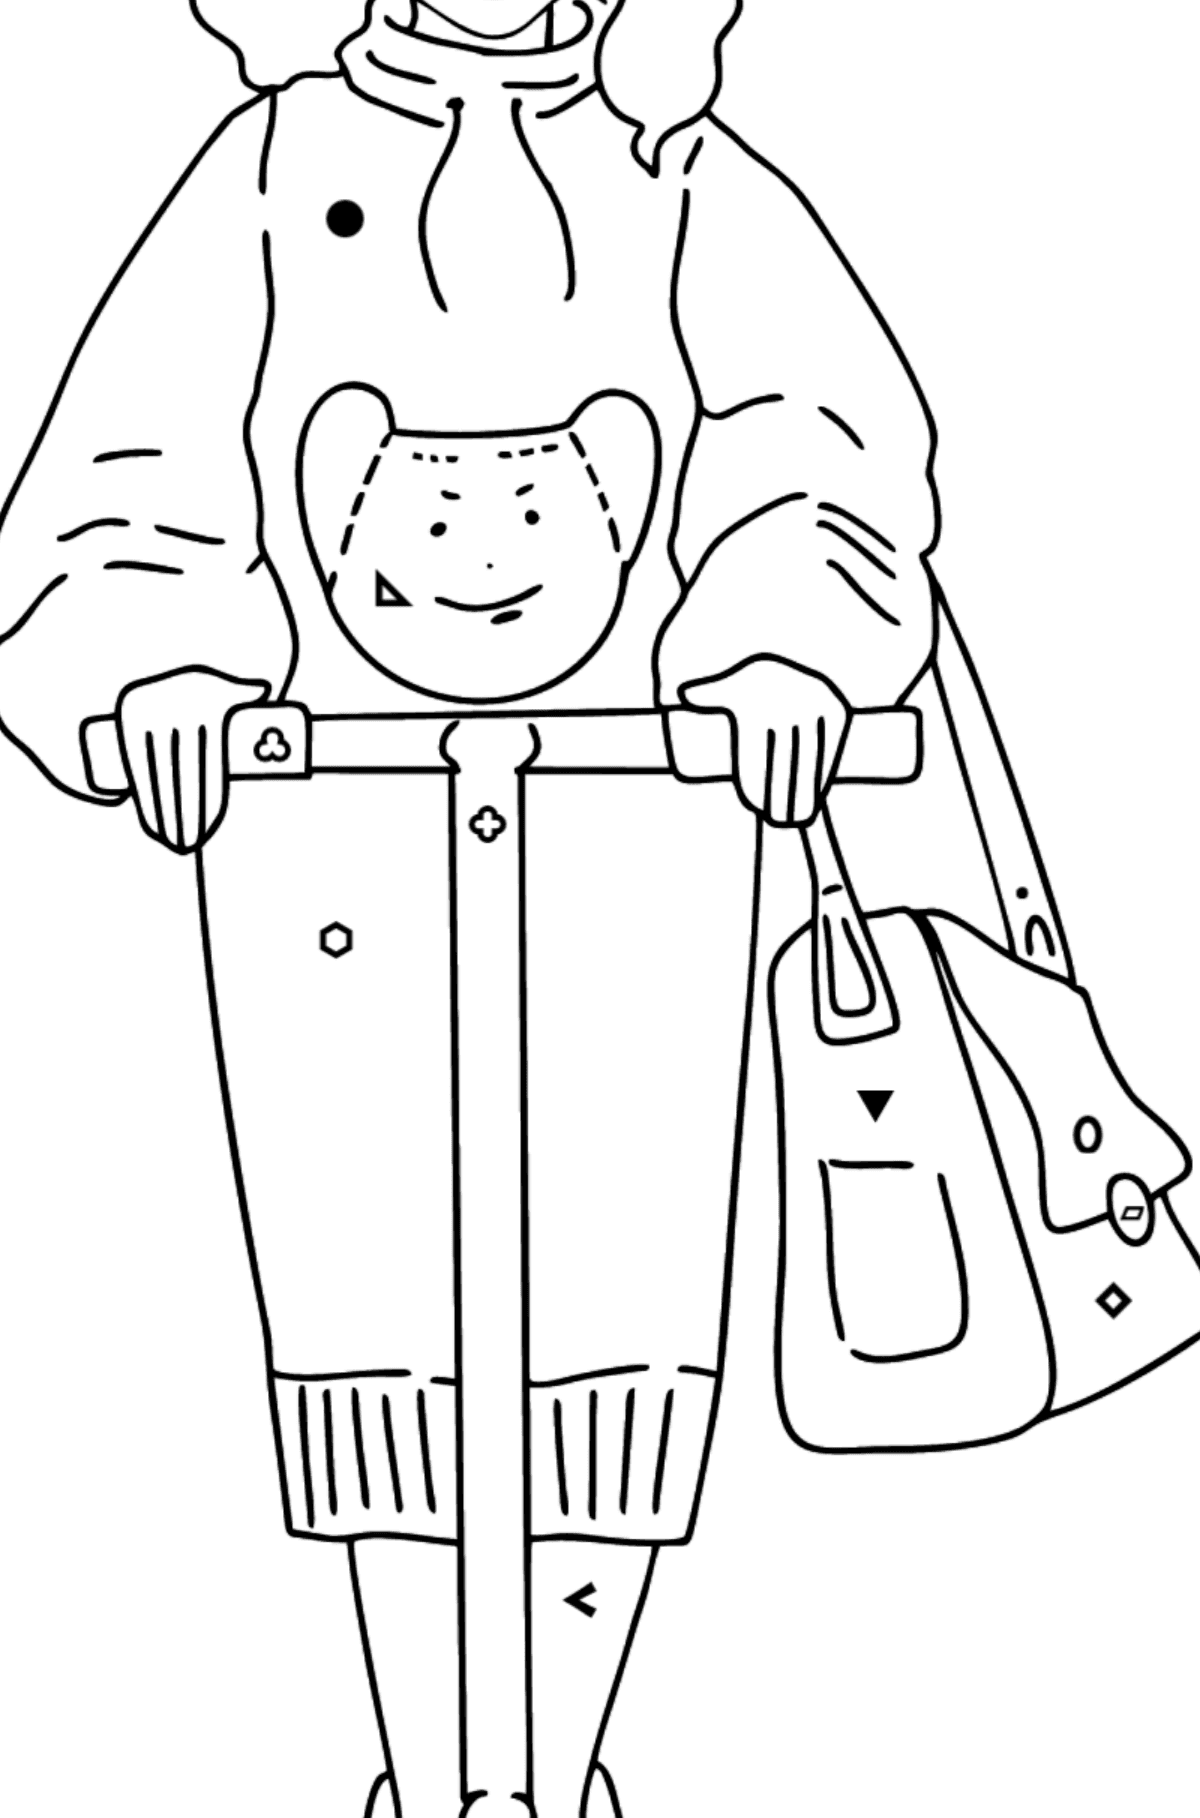 Barbie Doll Riding a Scooter coloring page - Coloring by Symbols and Geometric Shapes for Kids